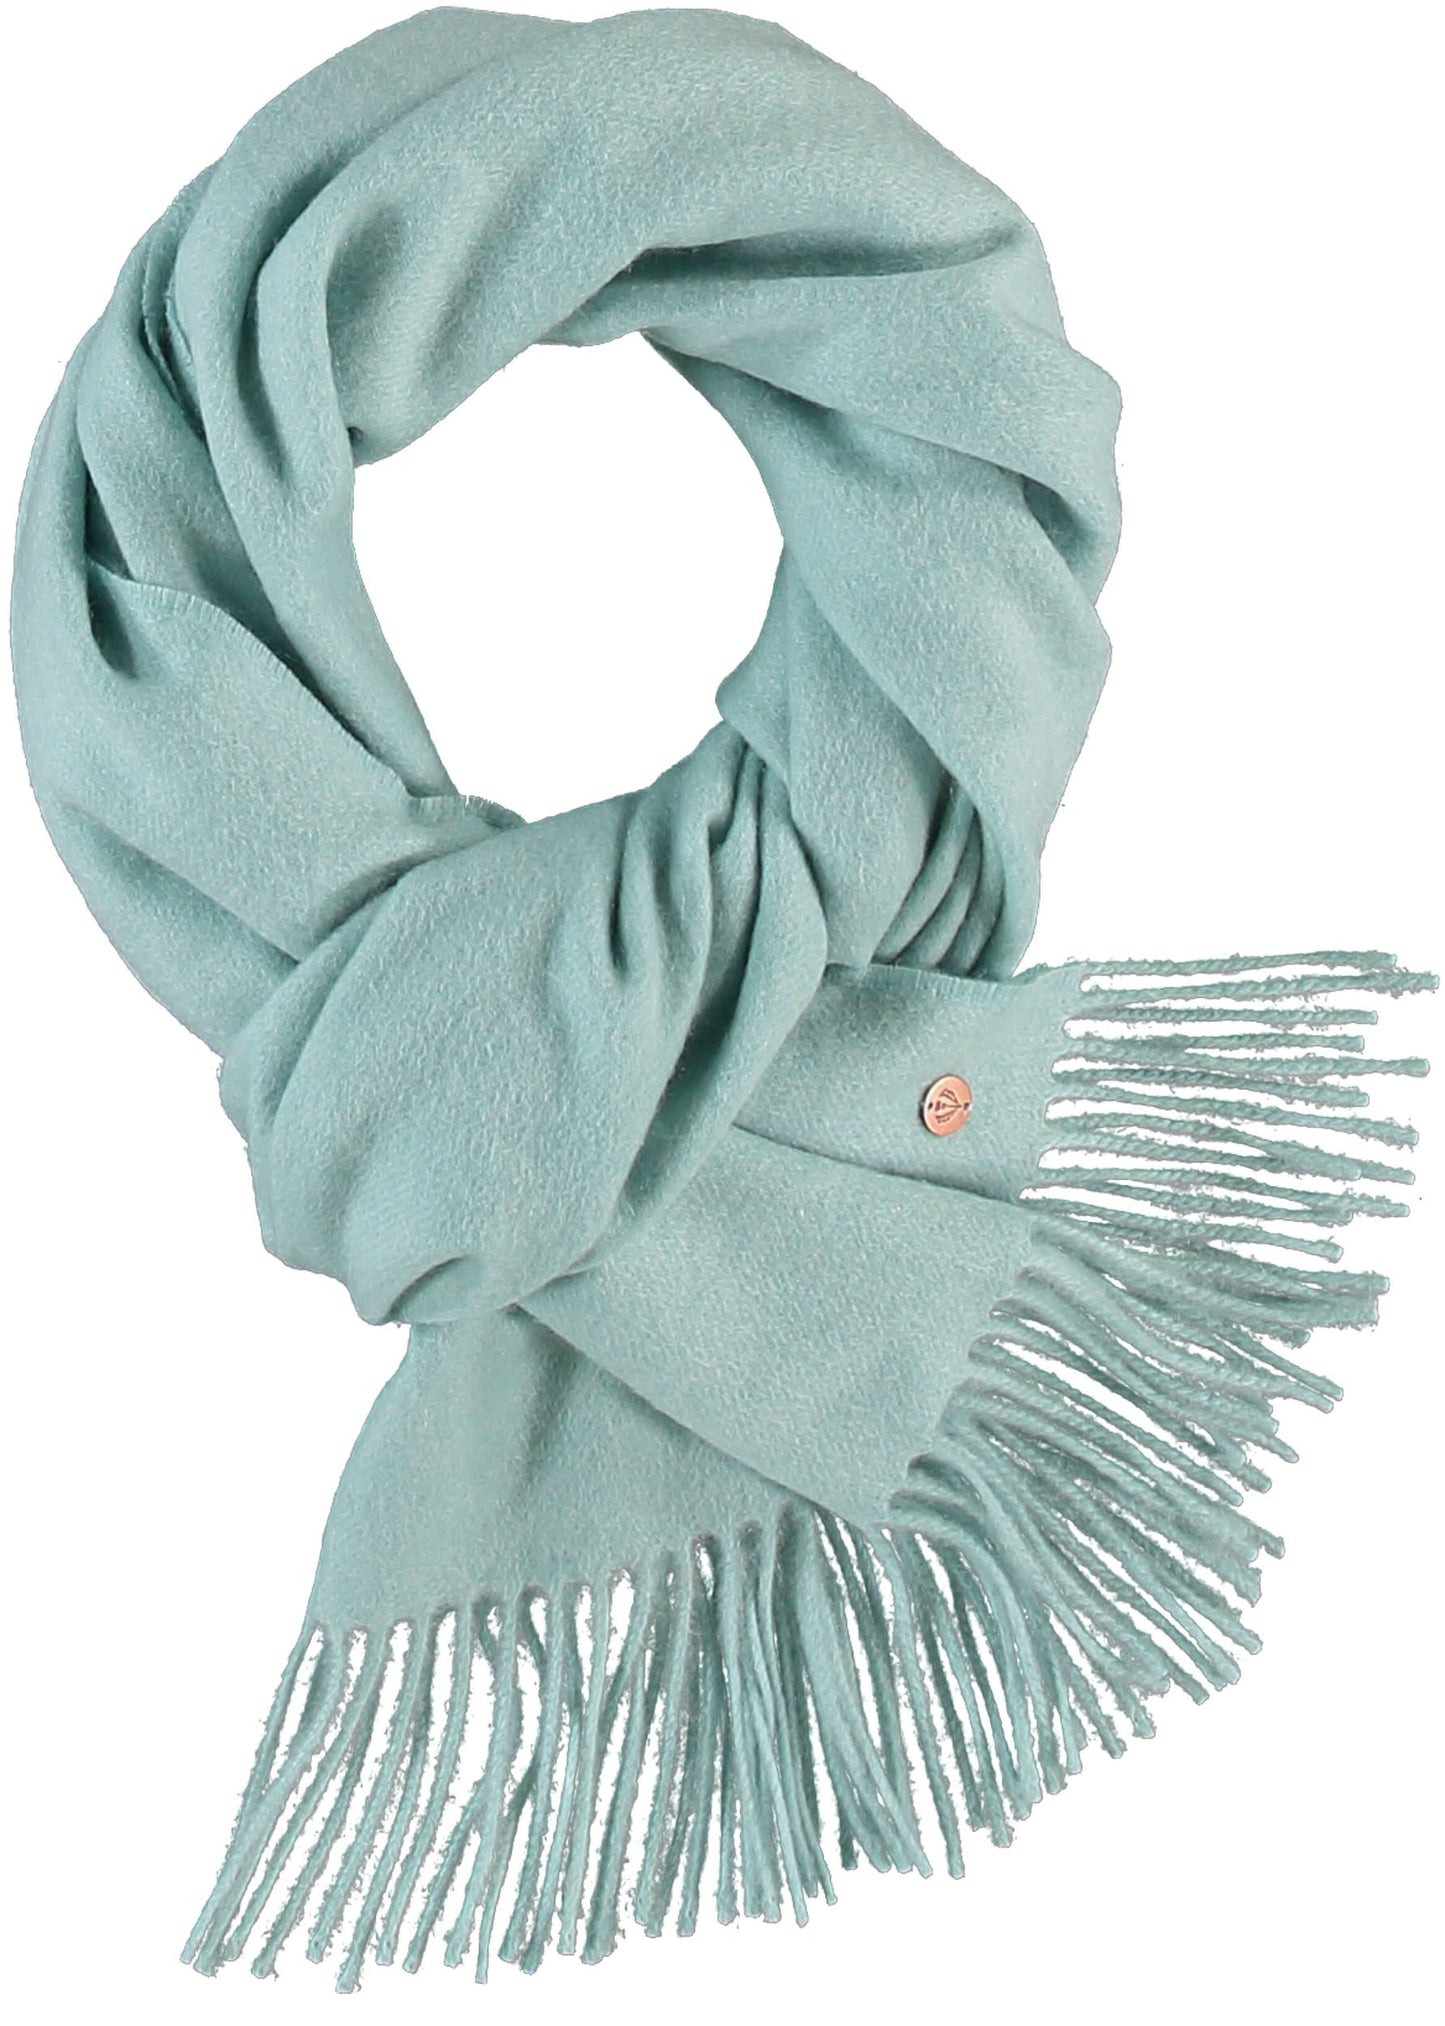 Cashmere woven scarf in powder blue by Fraas